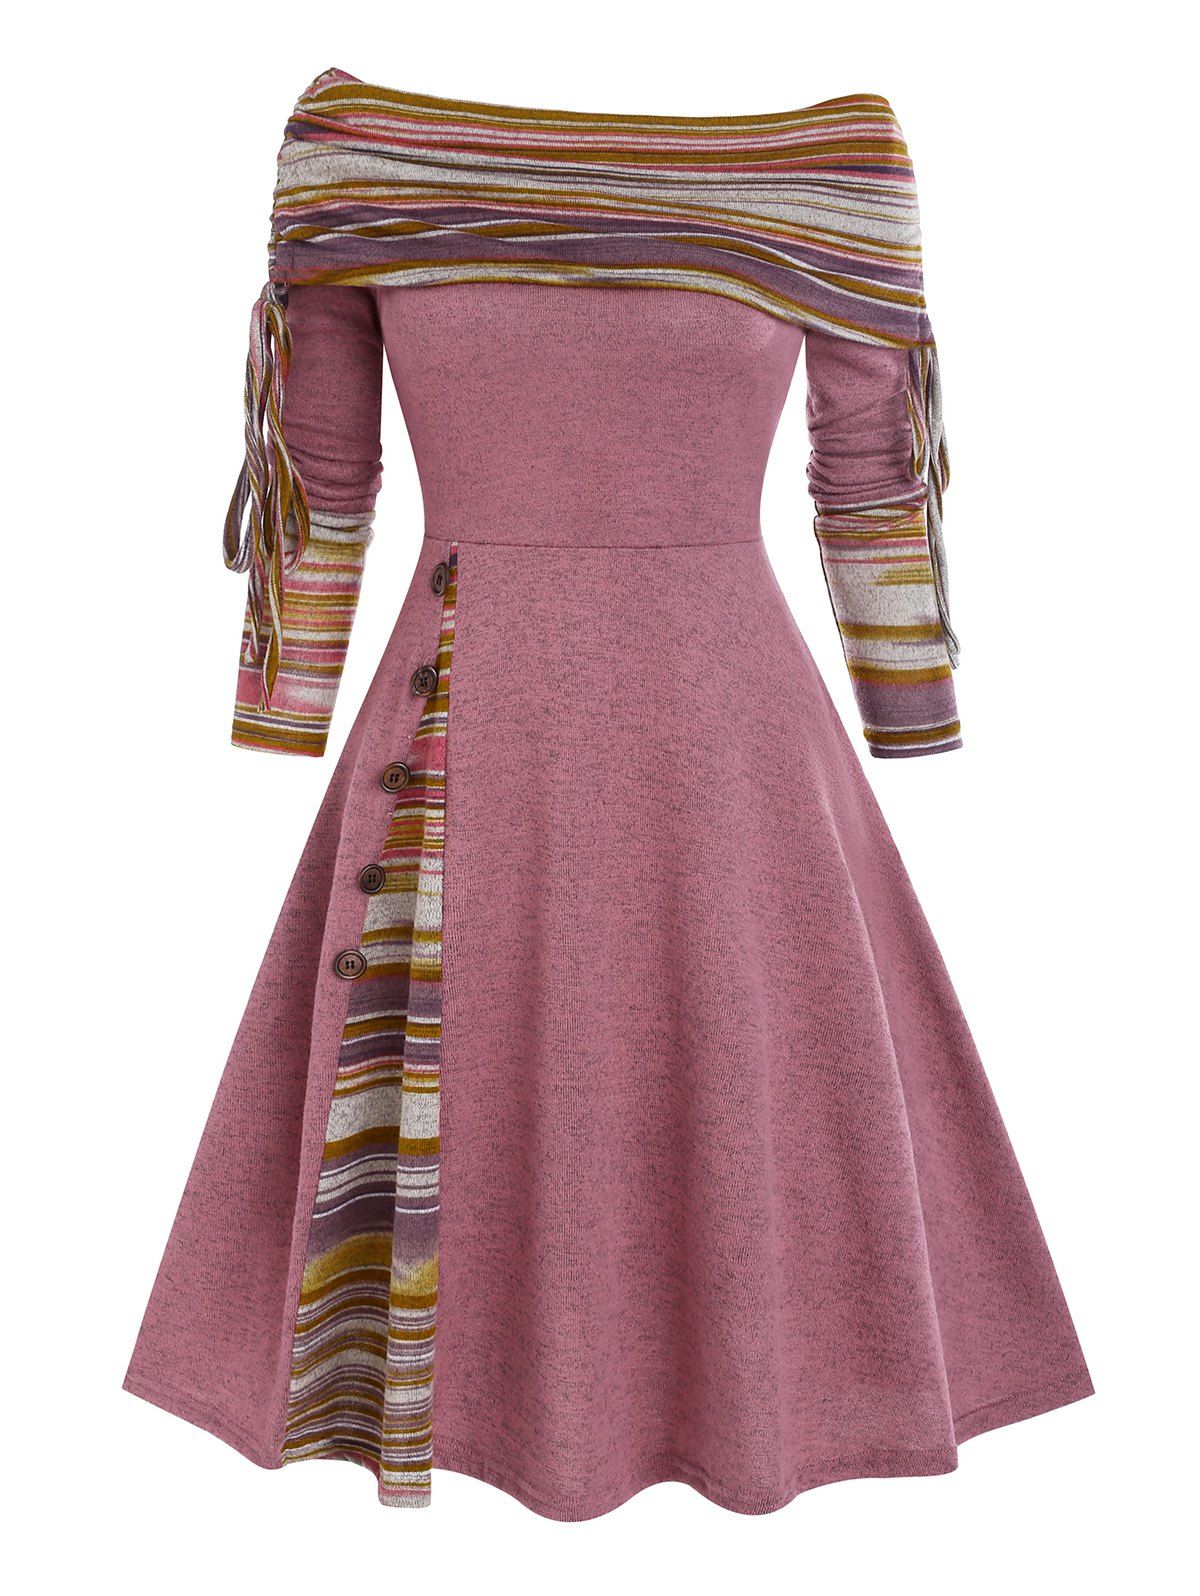 Convertible Neck Cinched Striped Flare Dress - LIGHT PINK XXXL